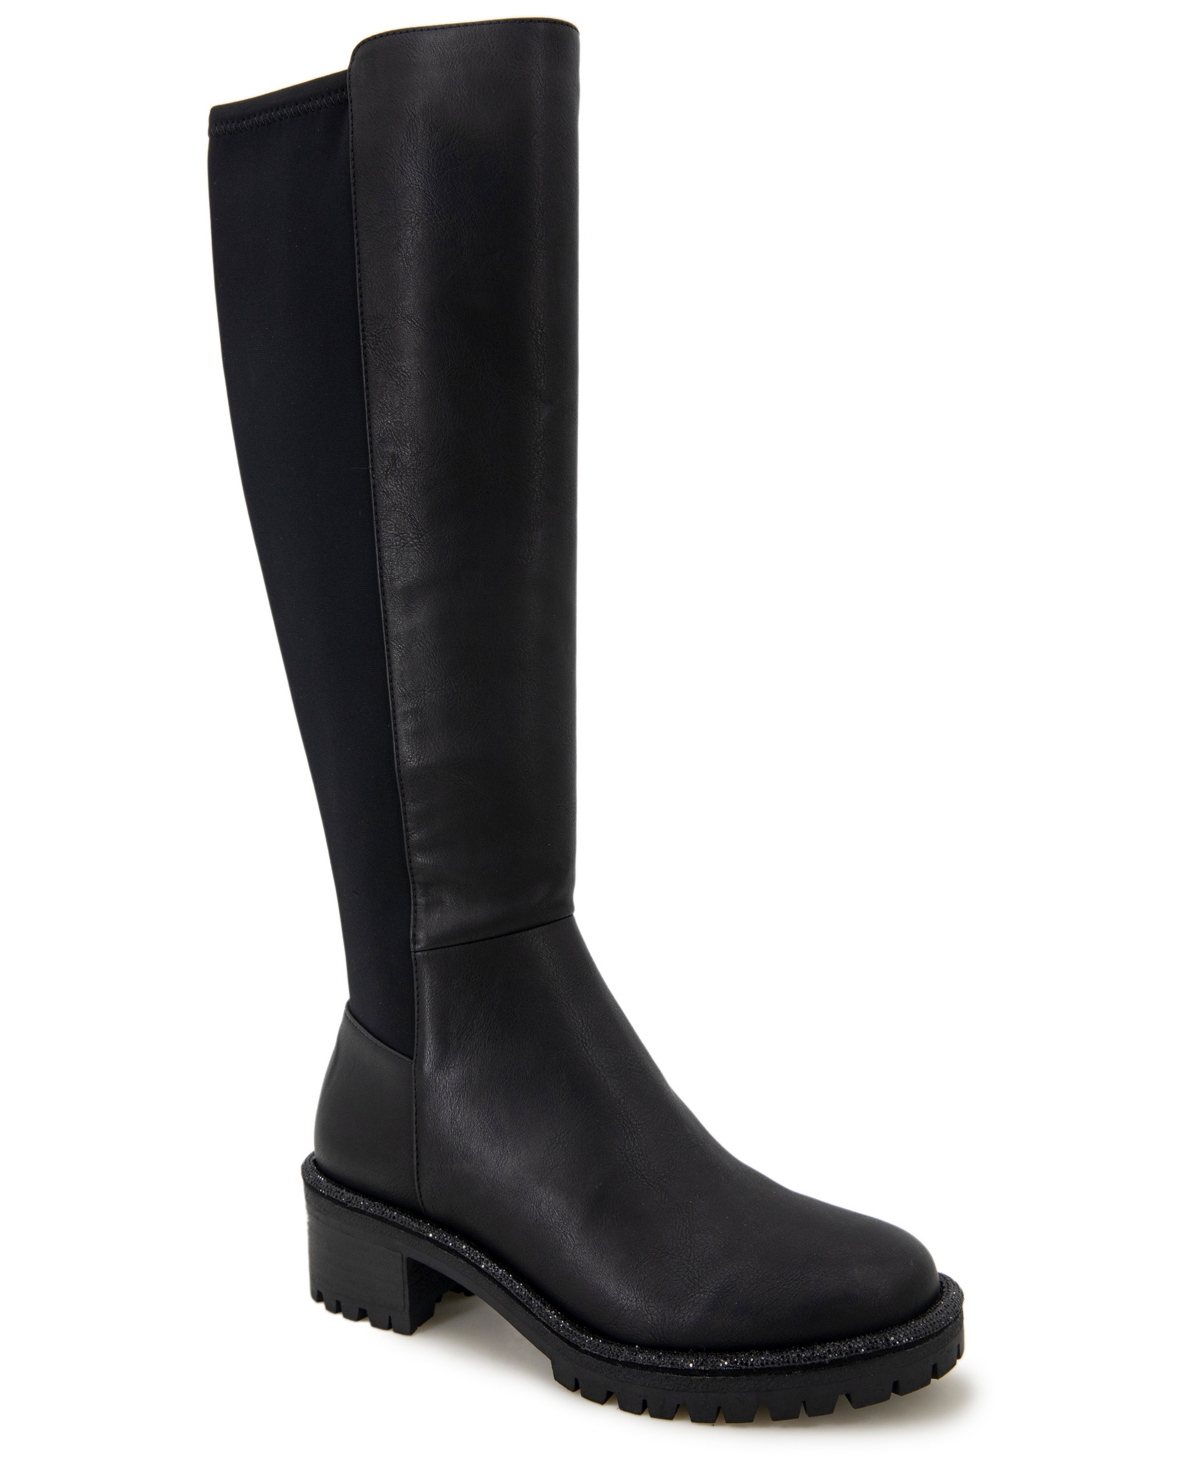 Kenneth Cole Reaction Women's Tate Jewel Stretch Tall Lug Sole Riding Boots Women's Shoes